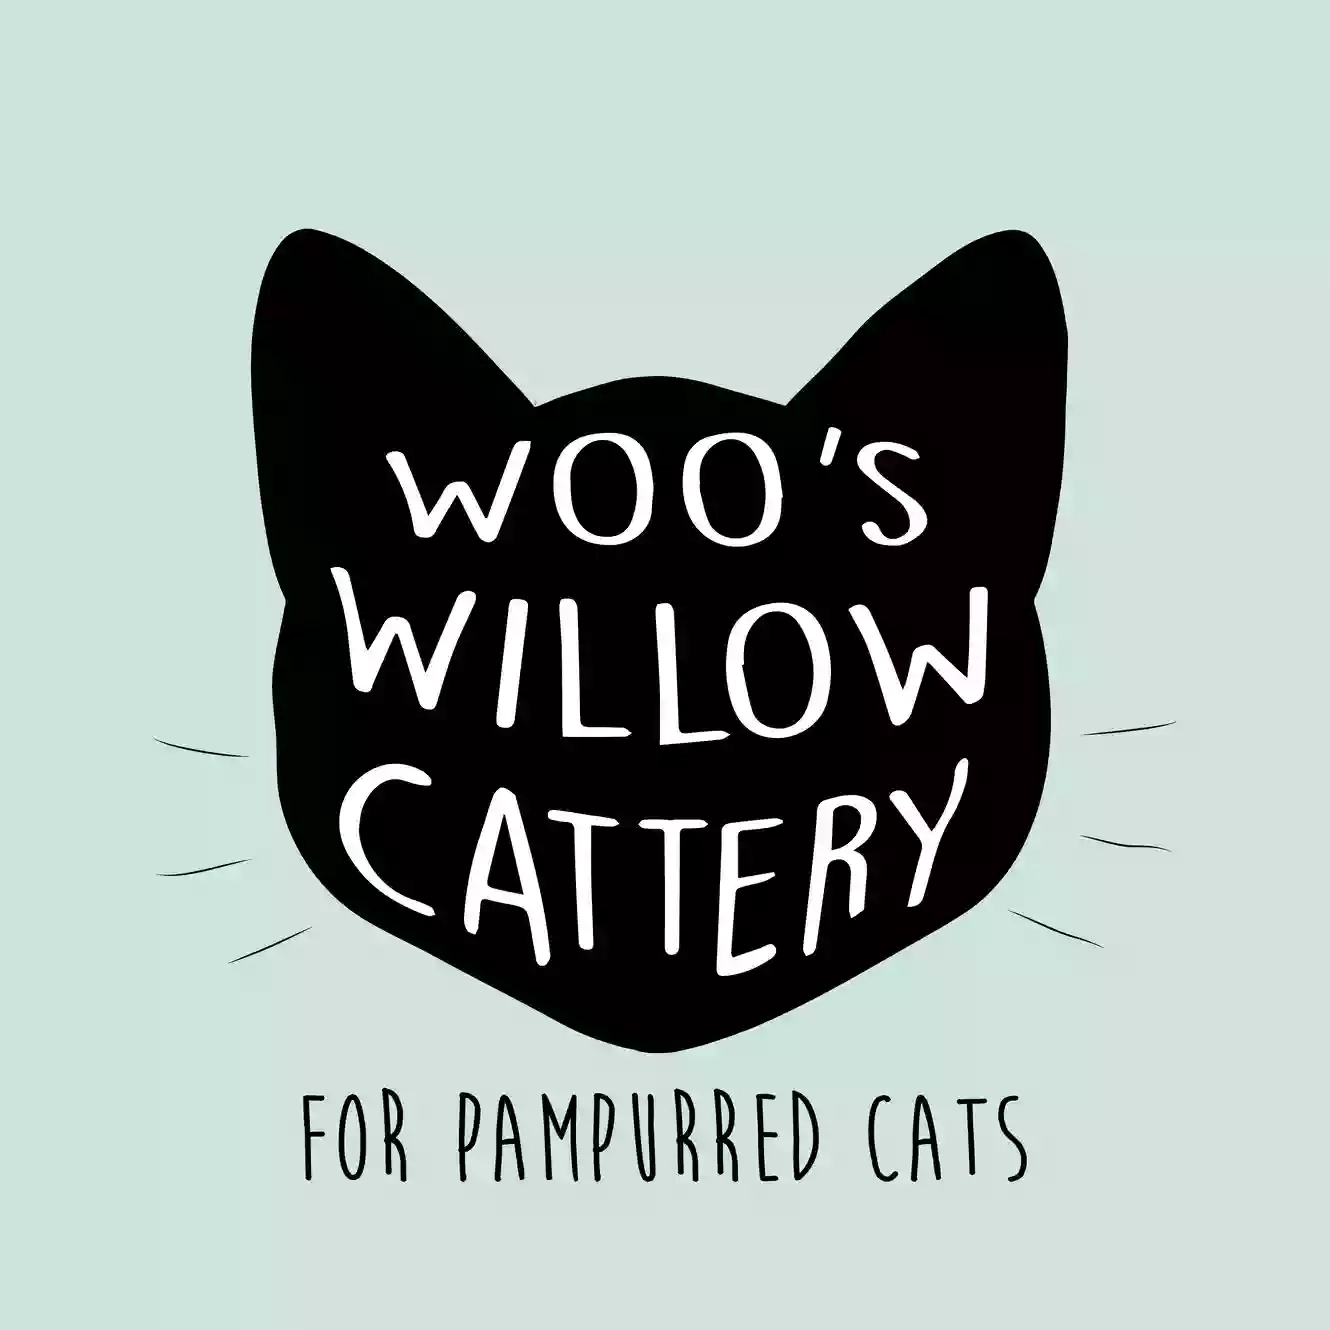 Woos Willow Cattery